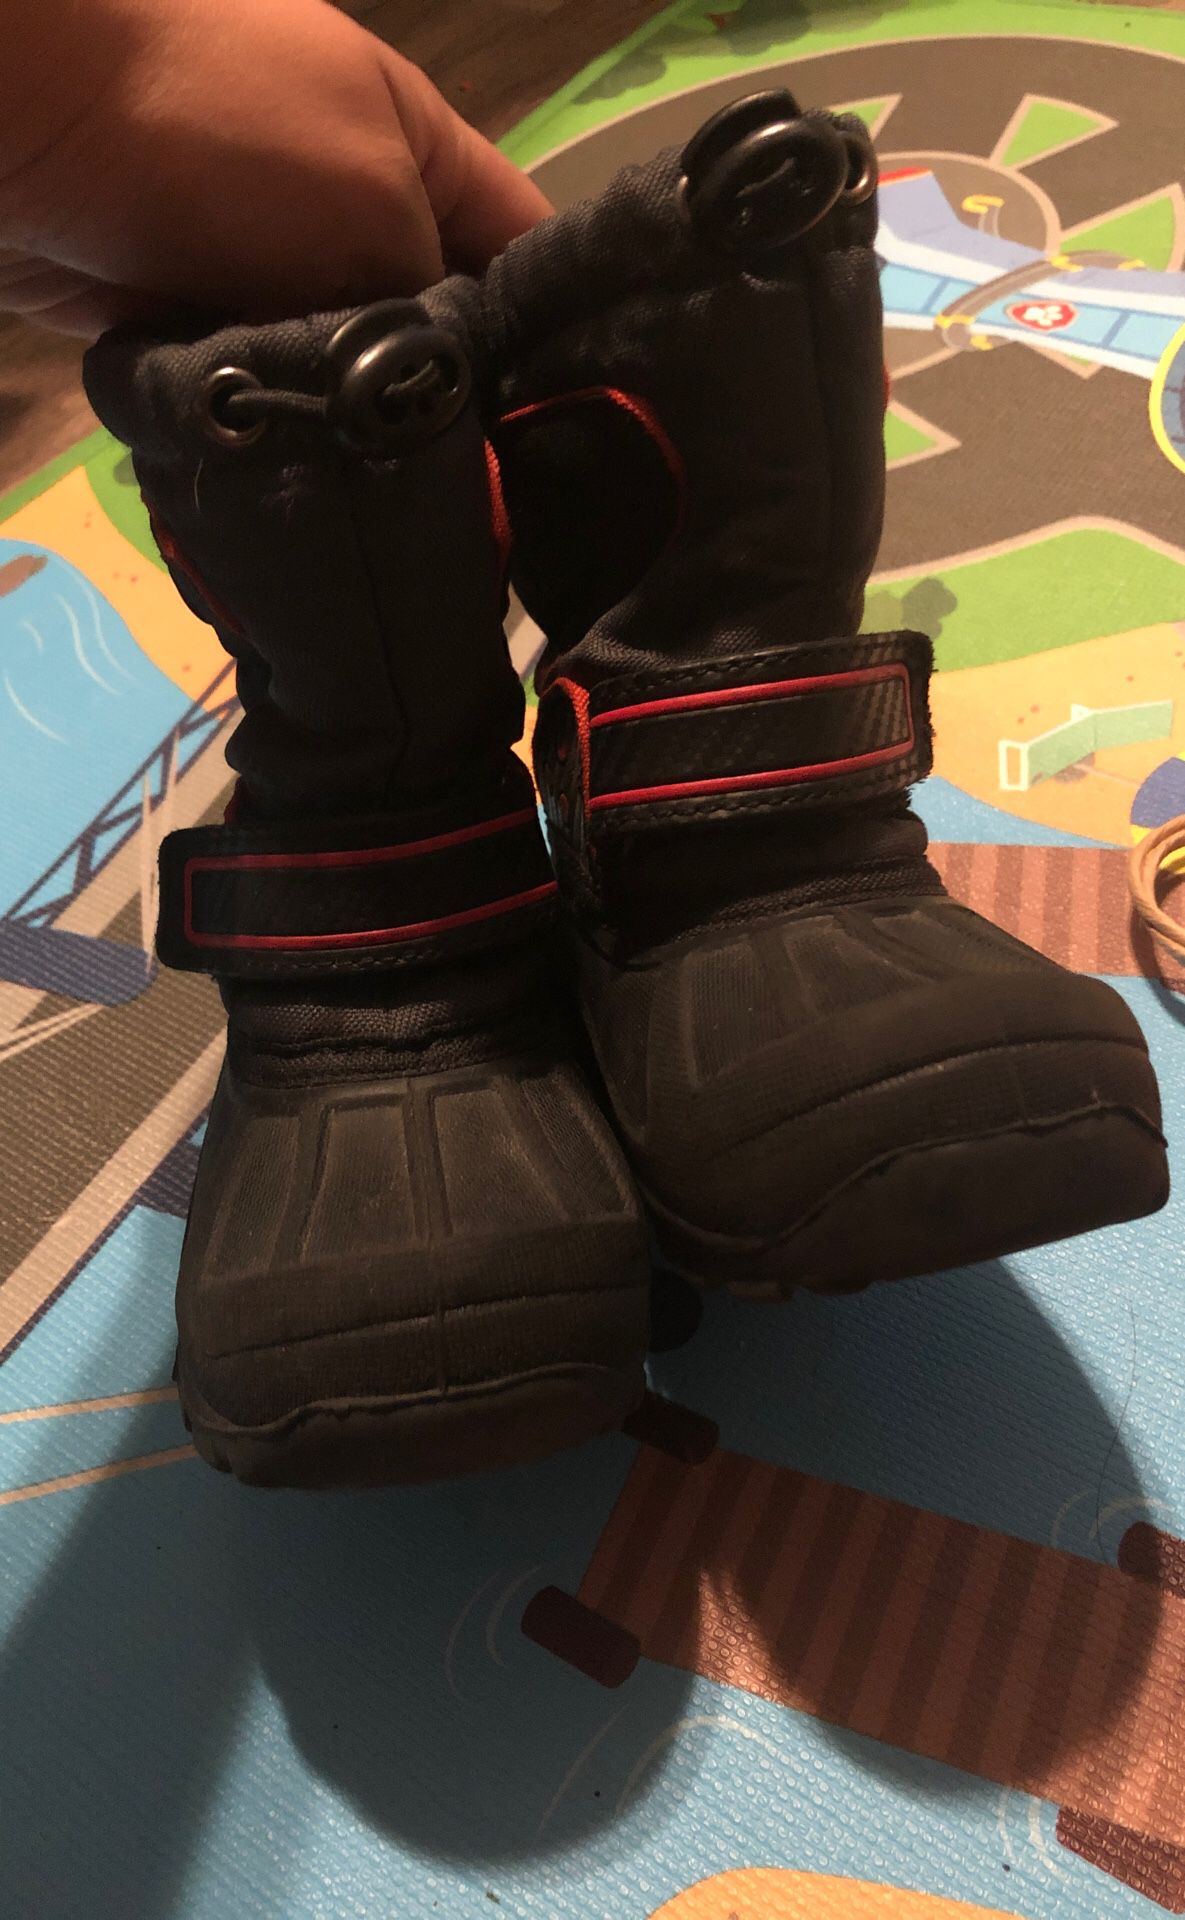 Snow boots for toddler